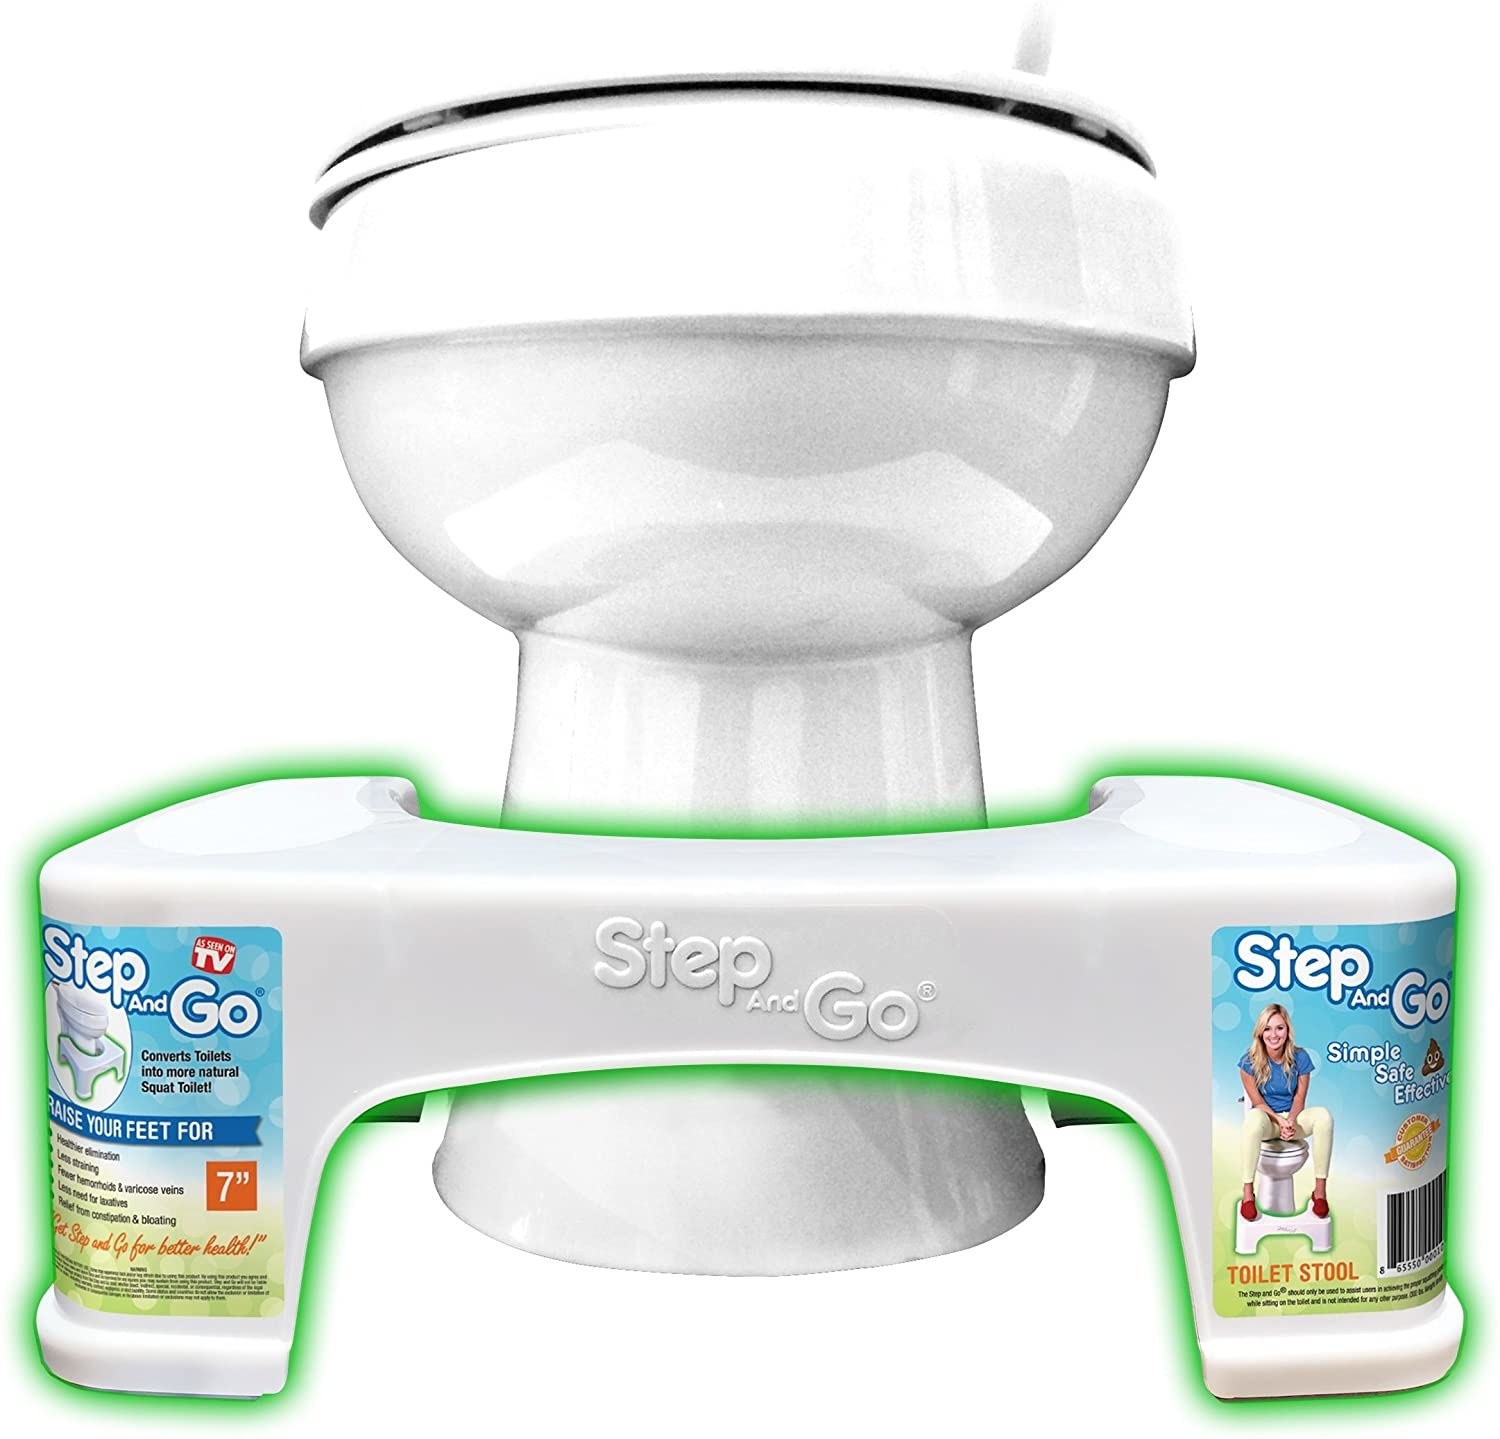 A step and go stool by a toilet